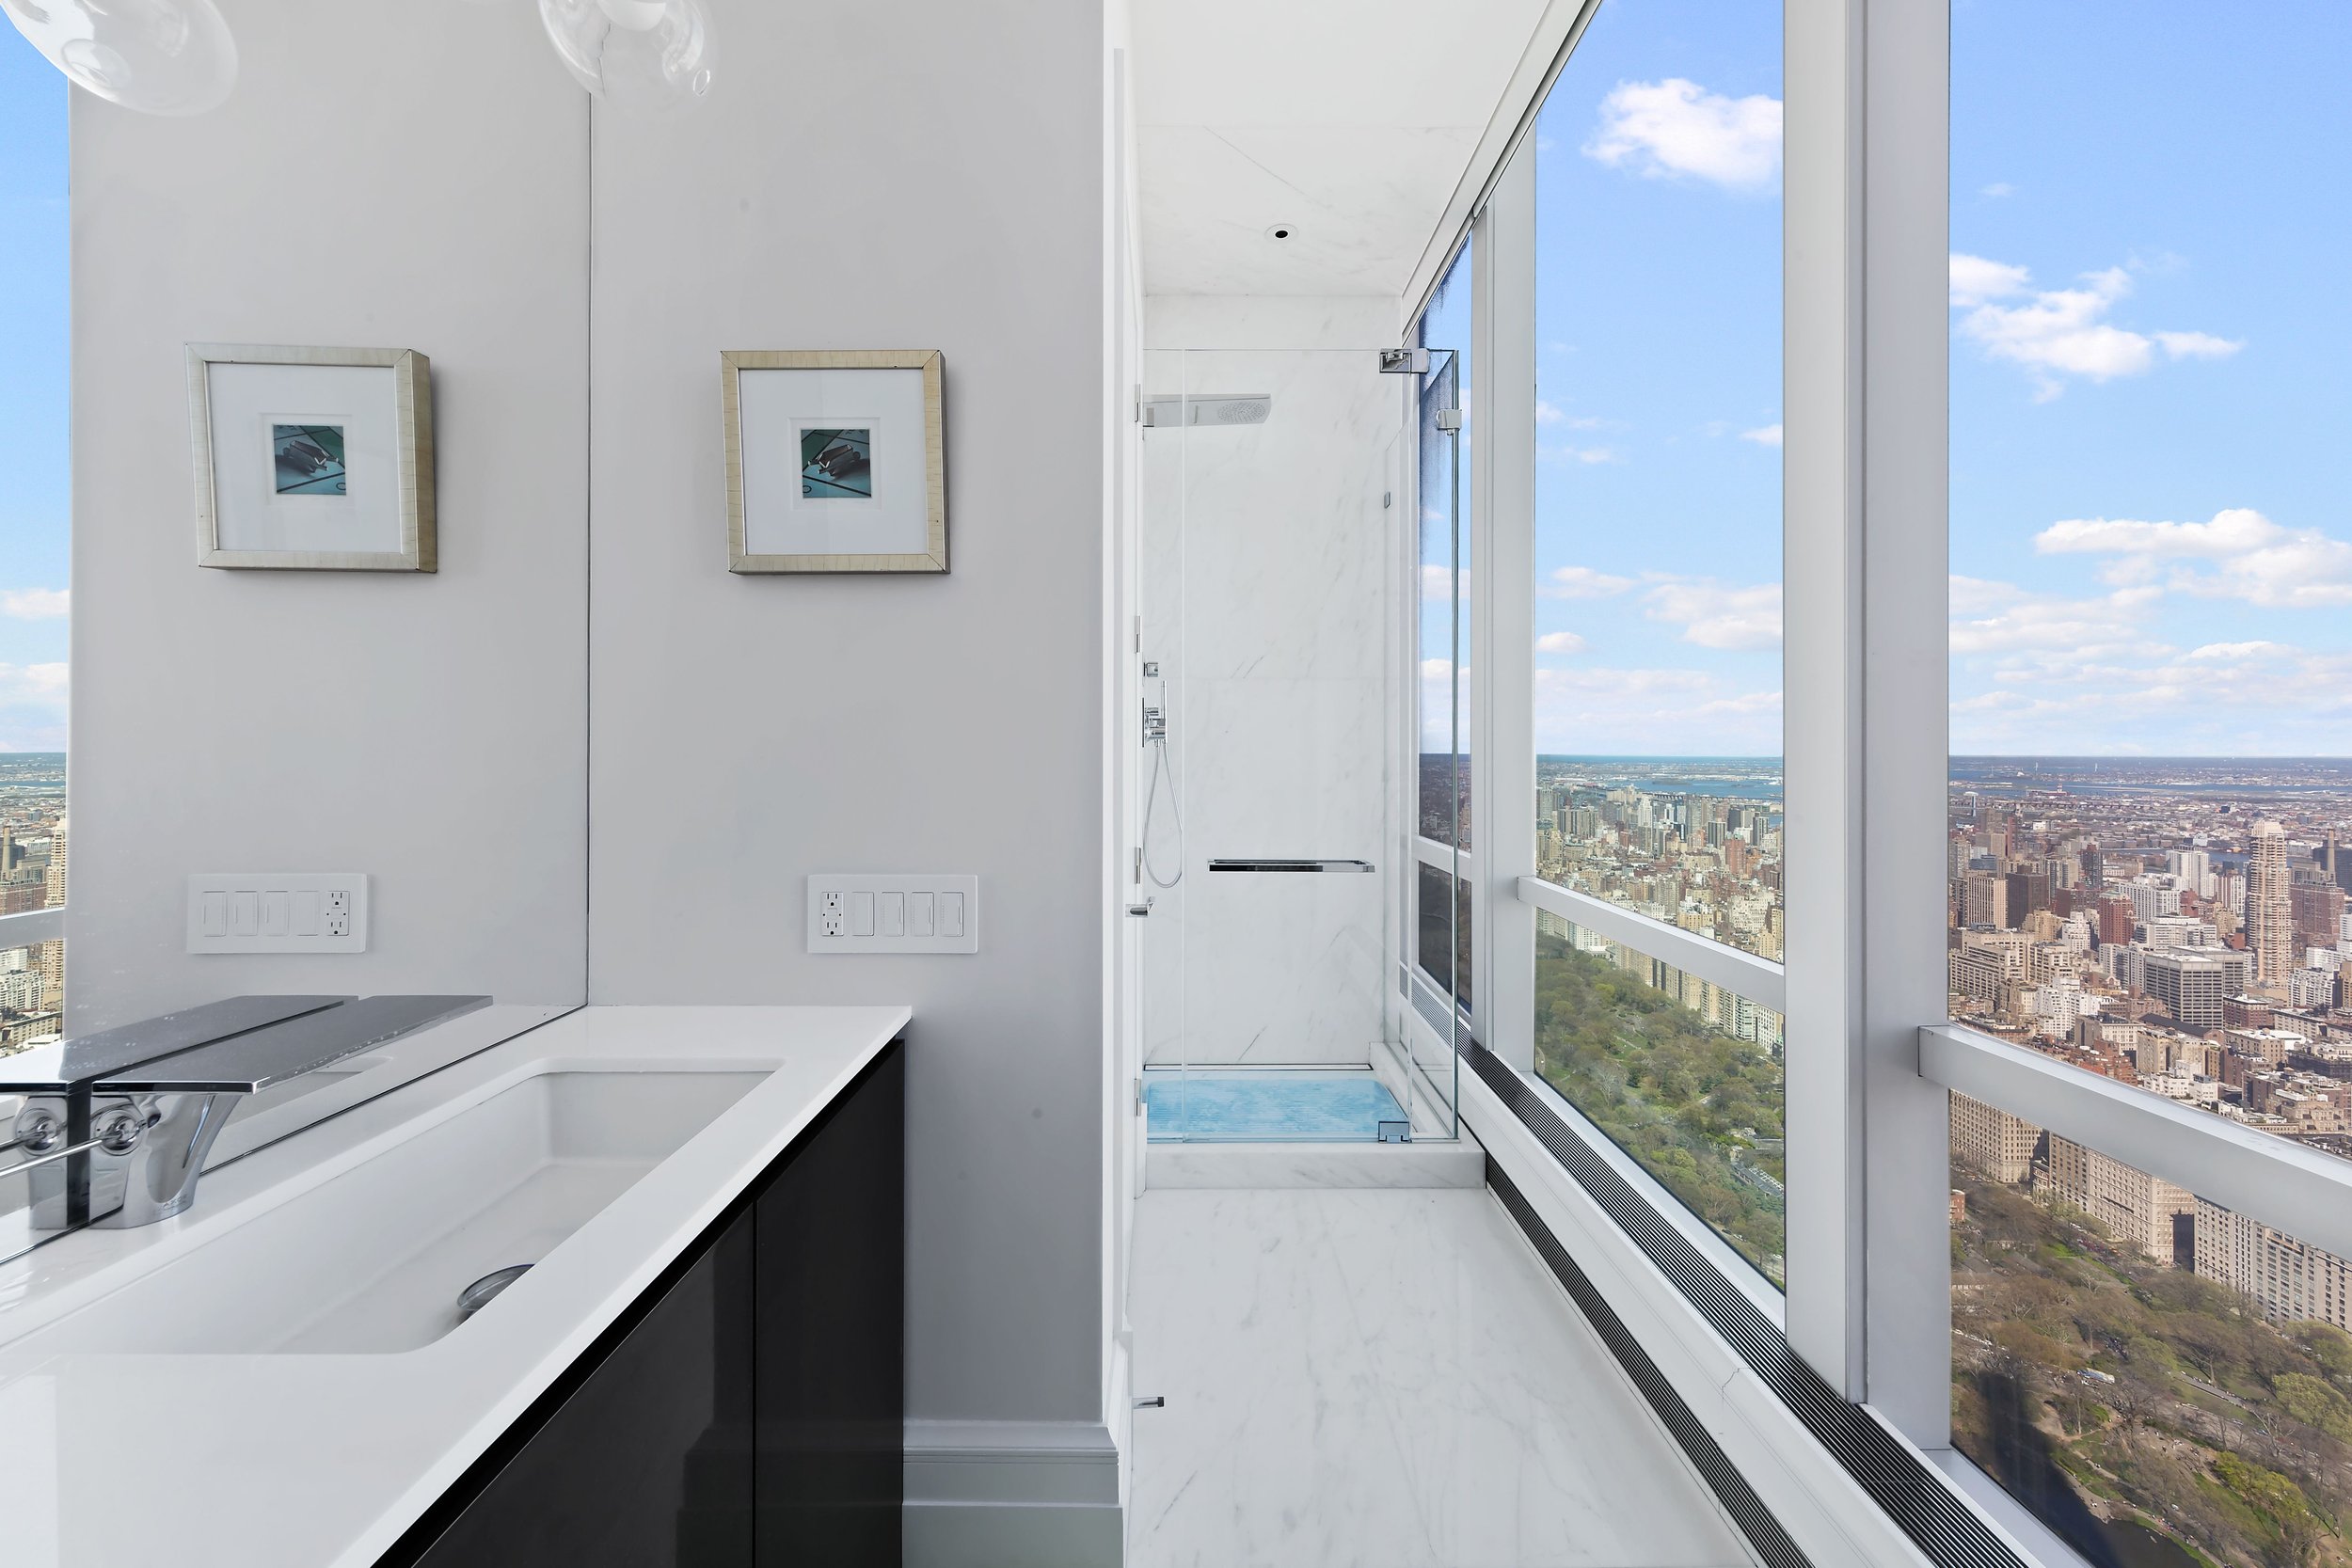  Residents of One57 enjoy valet parking, a private fitness center, dining and entertaining rooms, a screening and performance room, a pet spa, a library, and a billiards room. Additional Park Hyatt amenities include a state-of-the-art health club, po